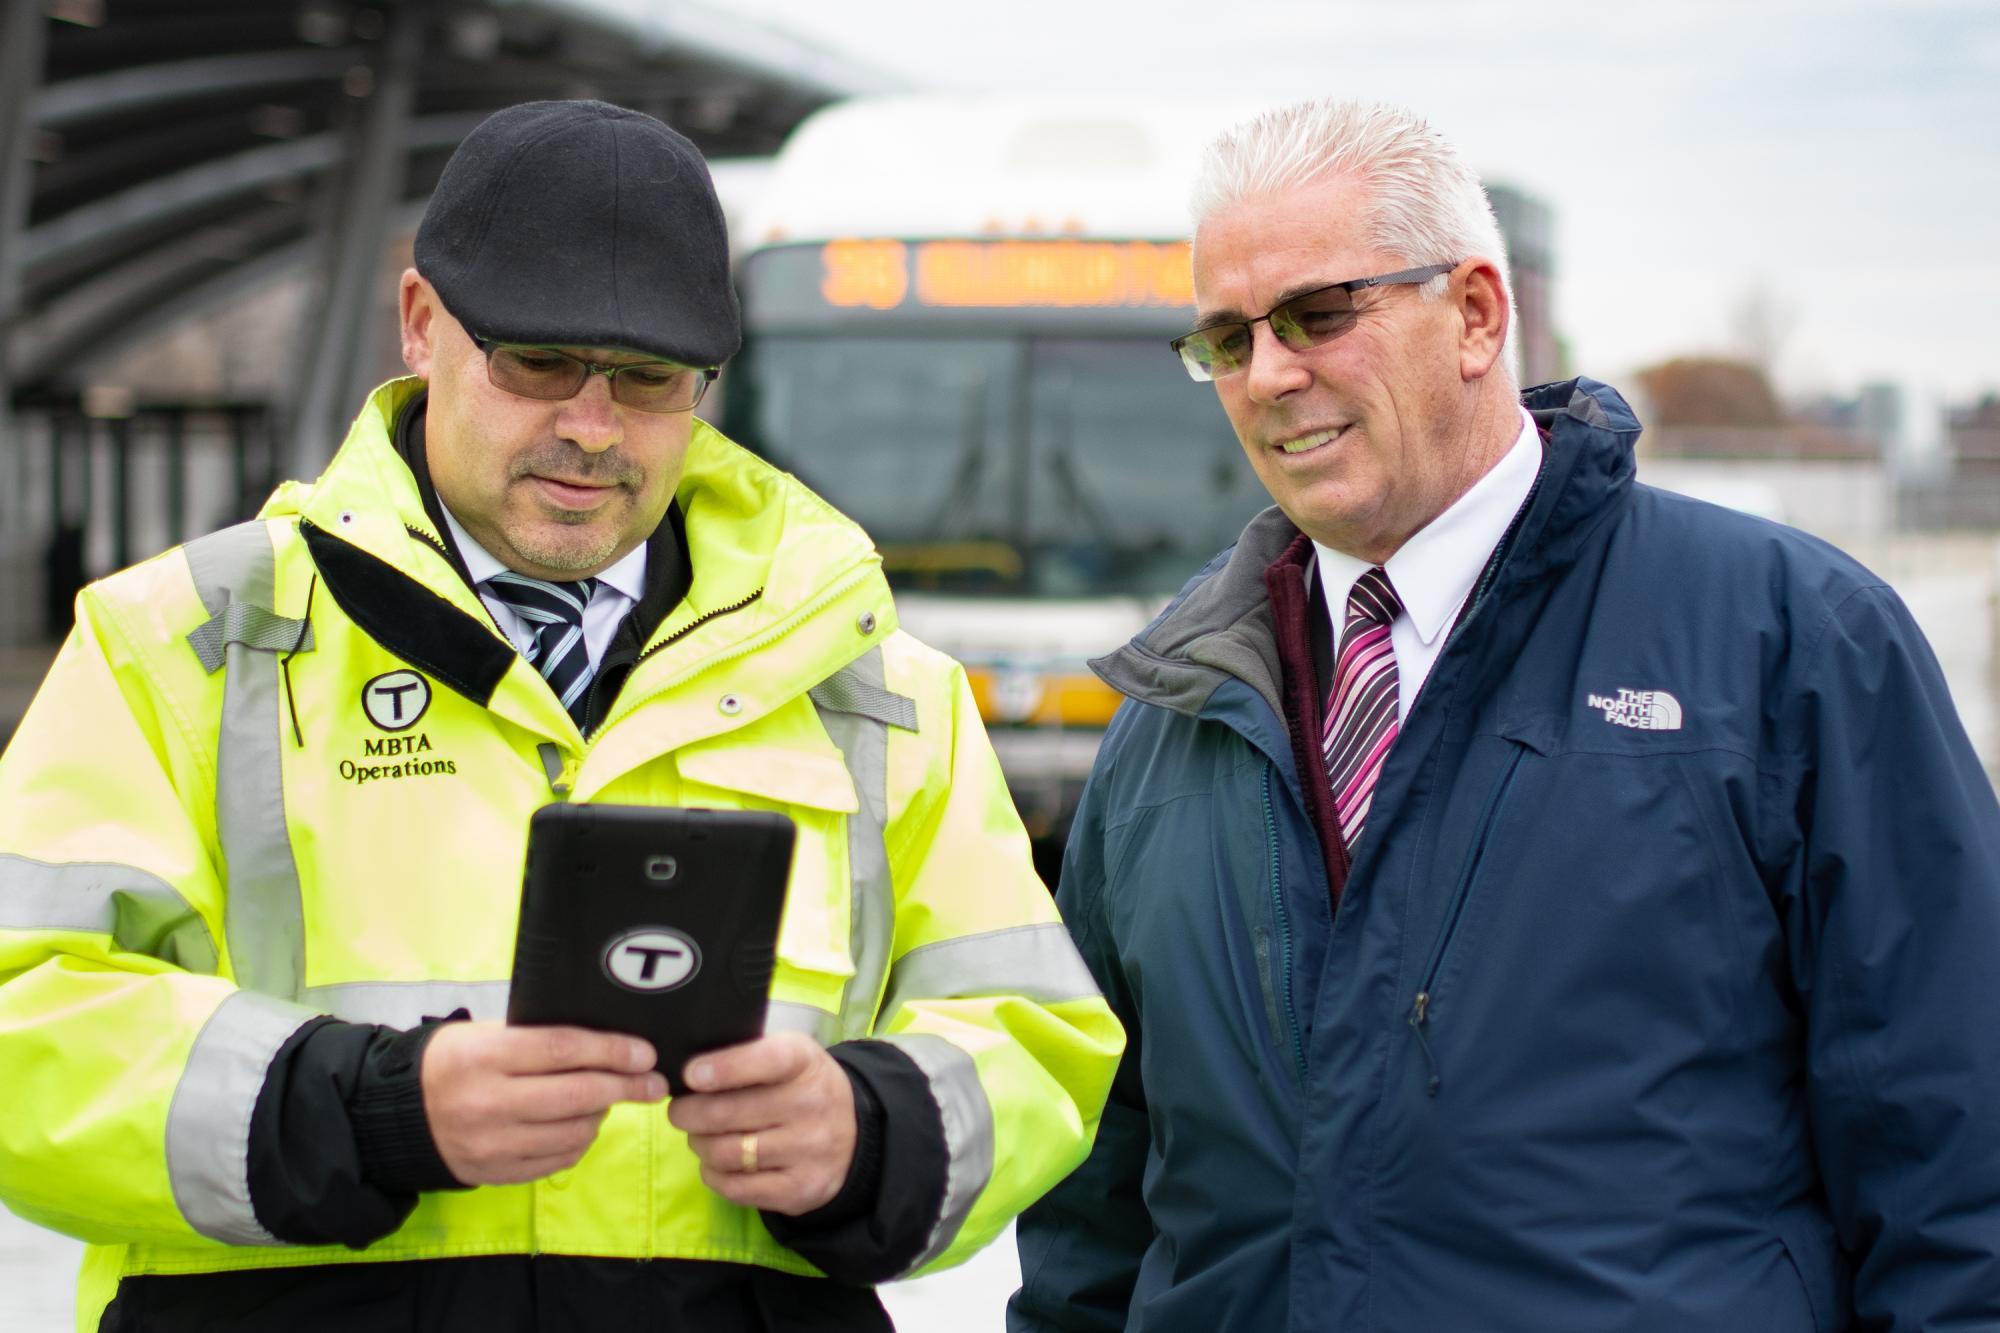 Road Control Supervisors Dorsey Dugan and Brian Clifford, who helped design Skate, a mobile dispatching app for bus inspectors